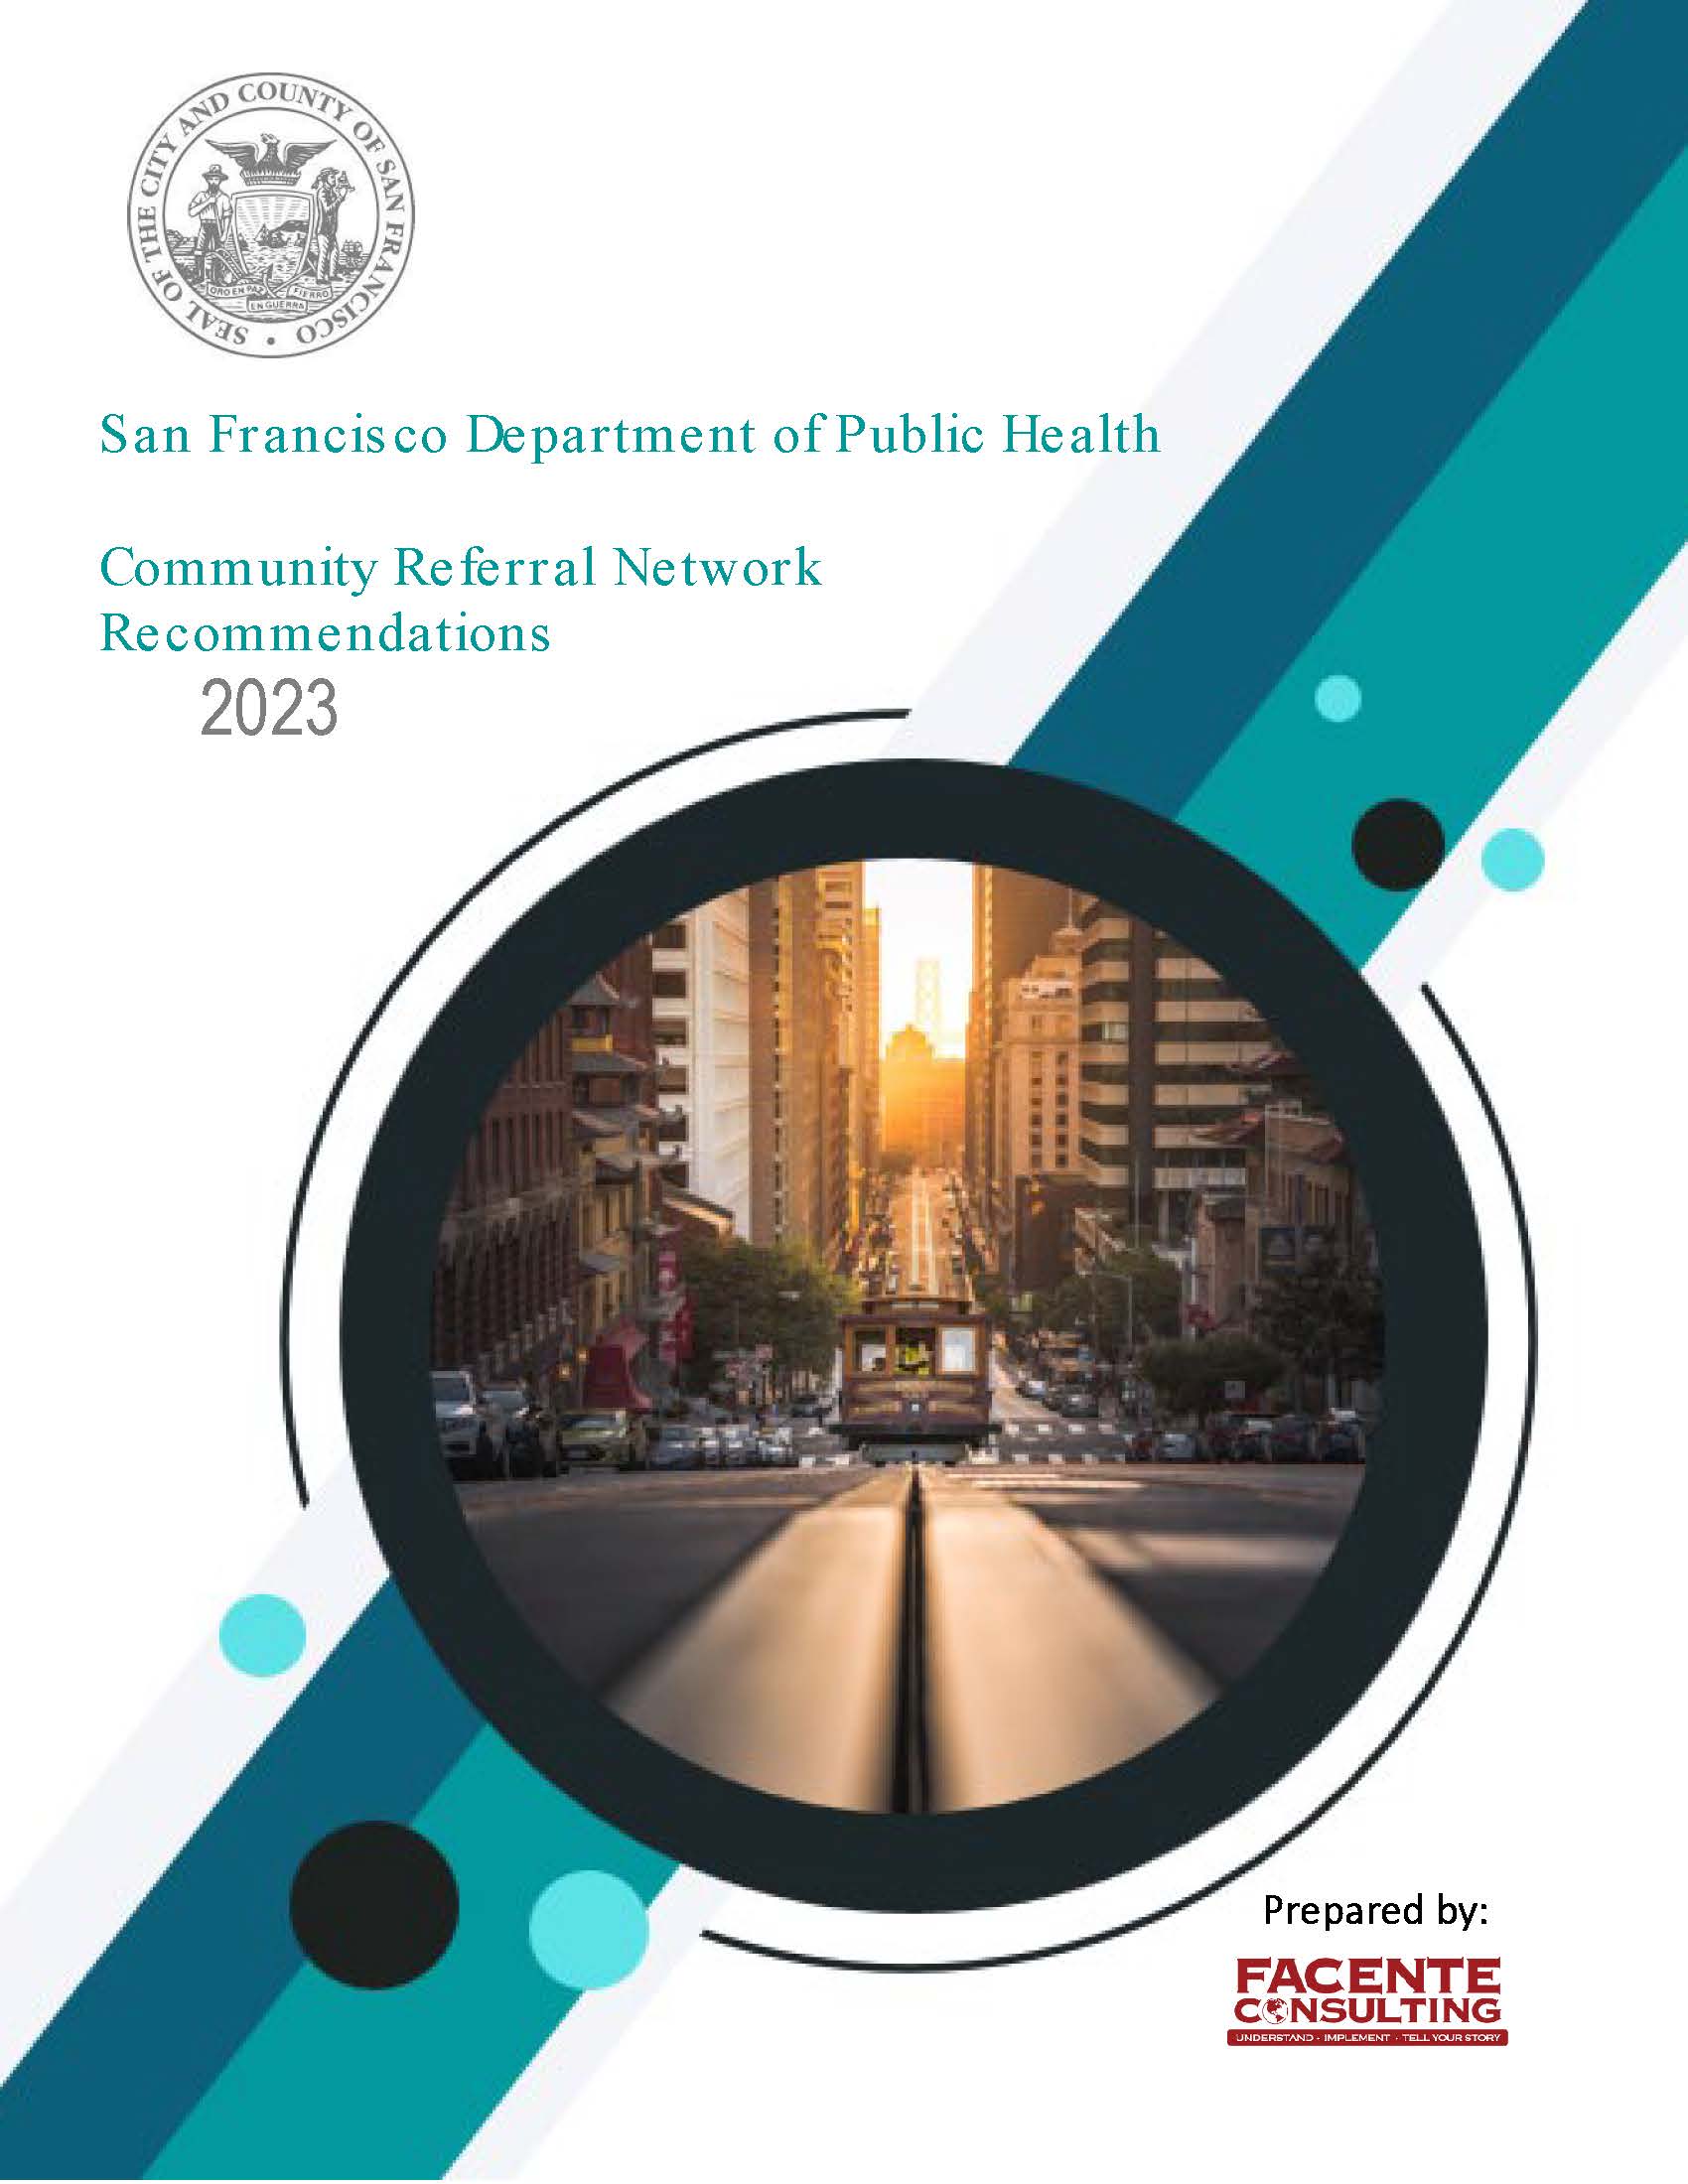 SFDPH Community Referral Network Assessment and Recommendations